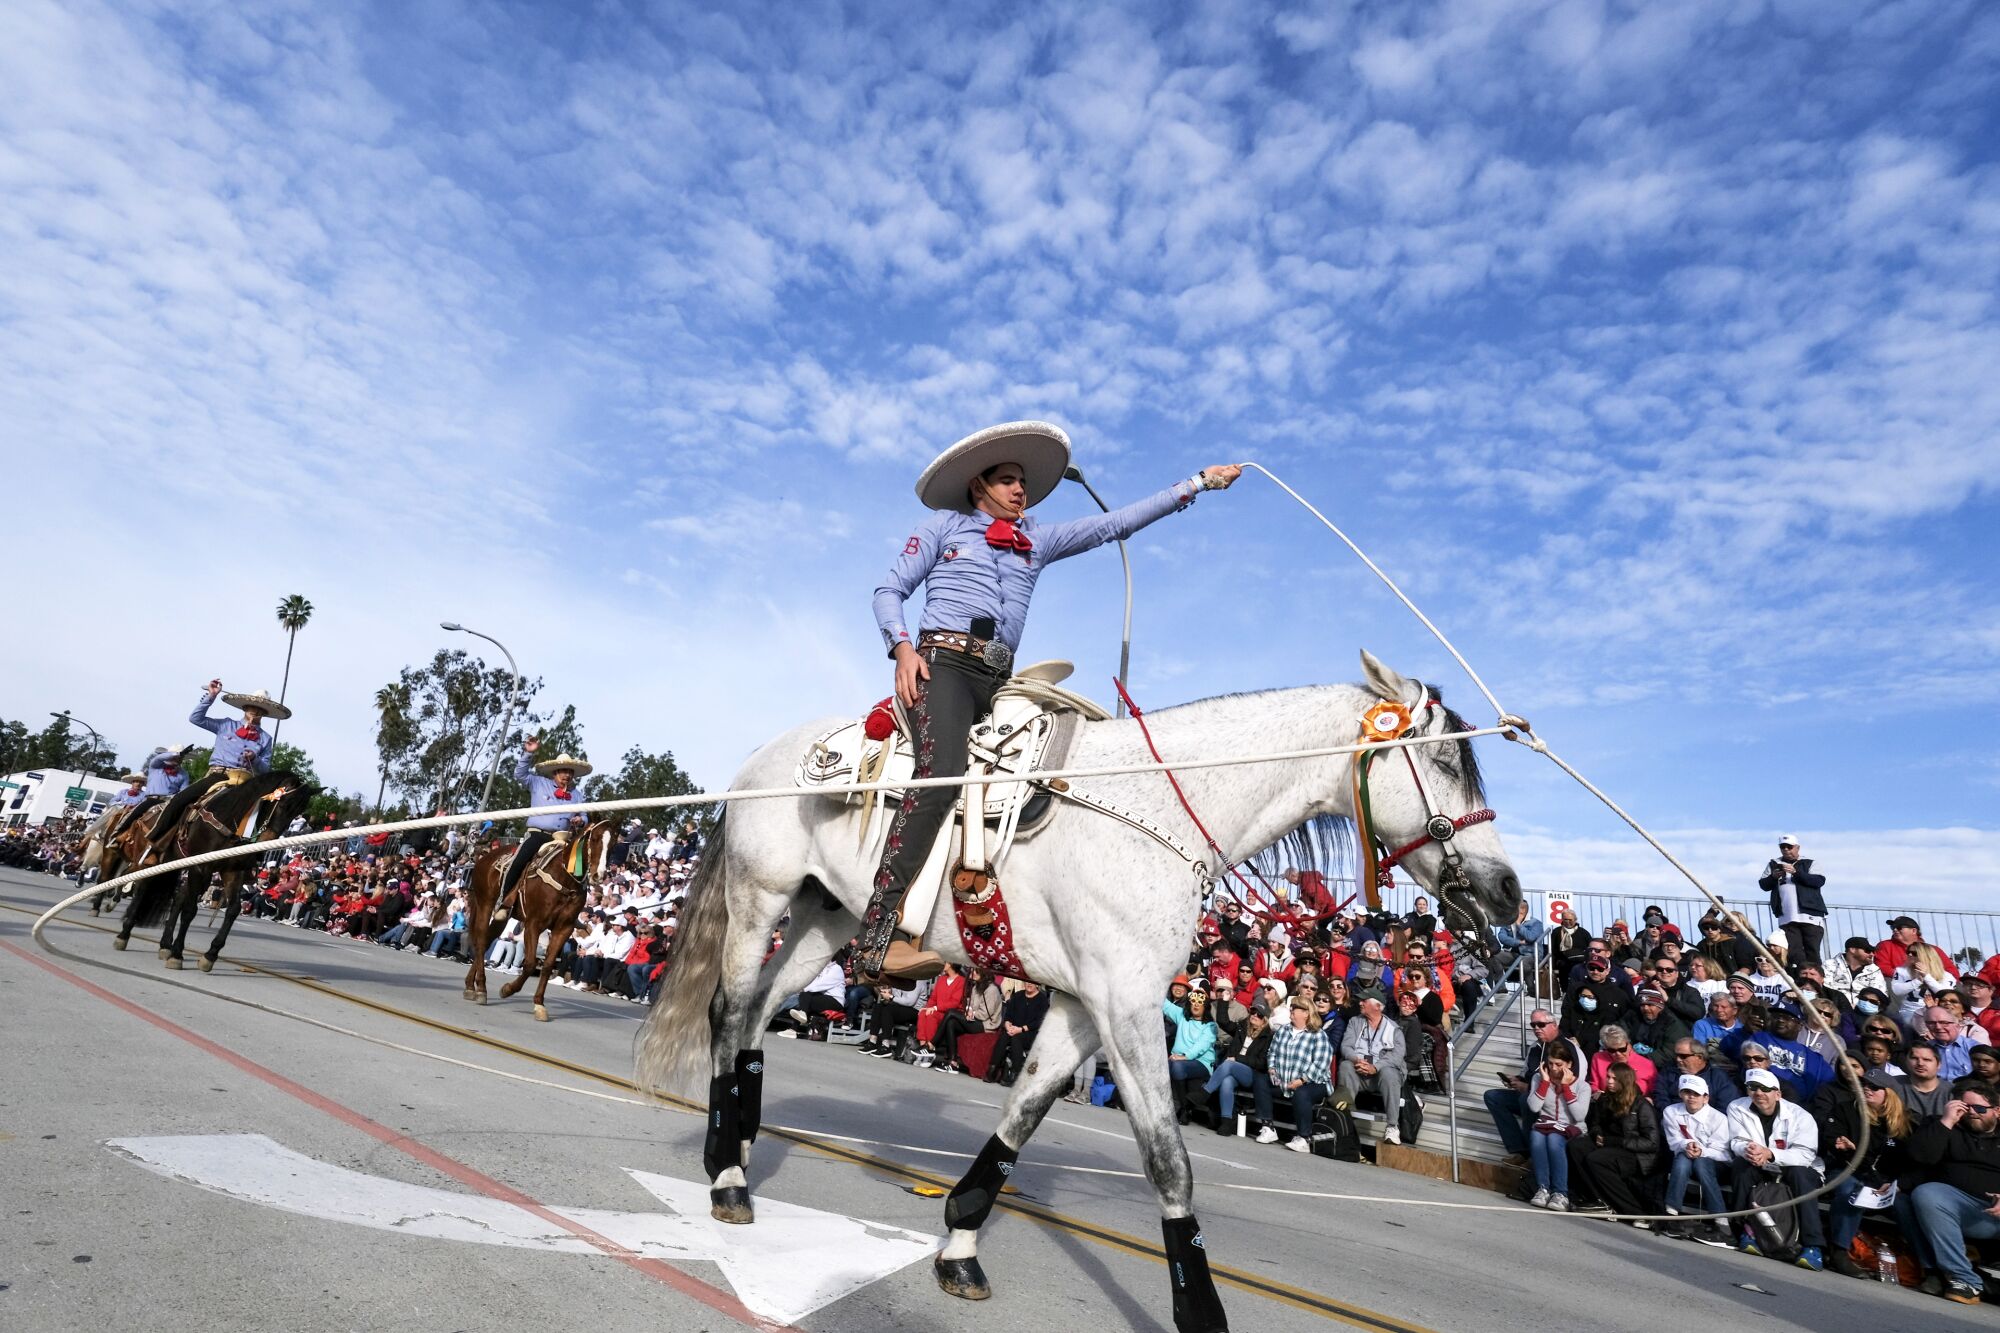 A man on a horse twirls during the Rose Parade on Monday.